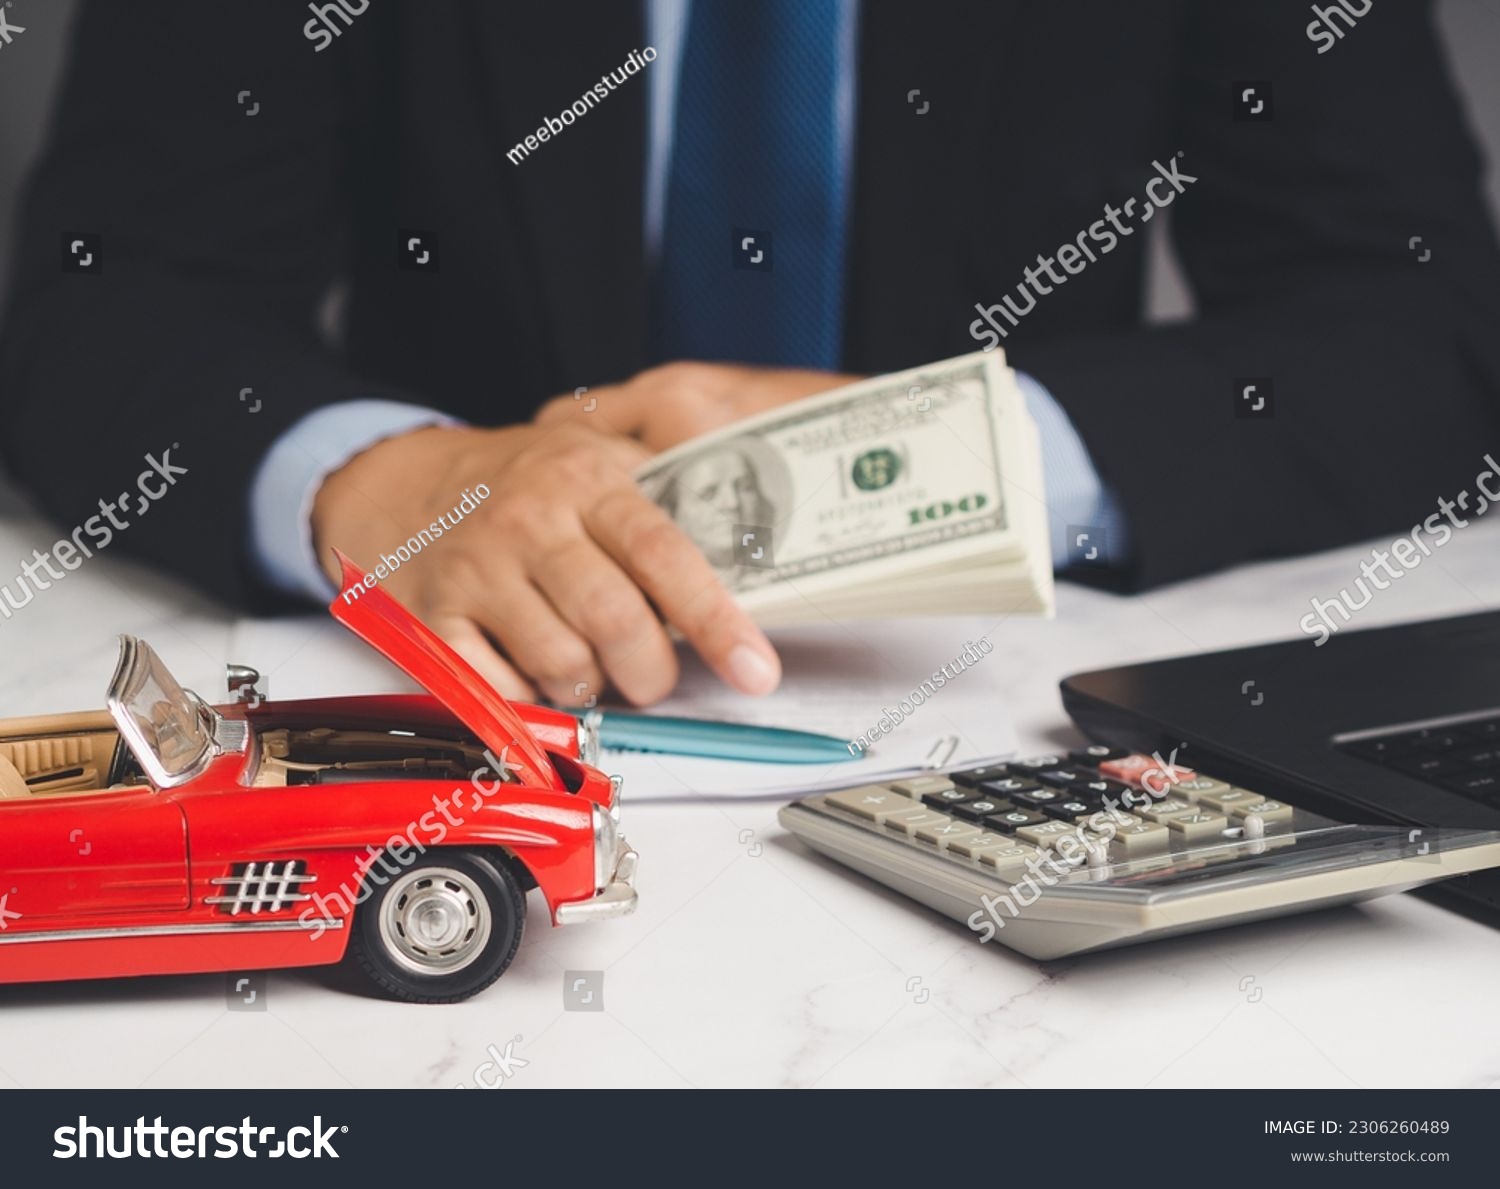 Car loan or Title loan. US dollar bills in a hand businessman while sitting at the table. Miniature a red car model, a calculator, and a laptop on a table. Car finance and insurance concept #2306260489